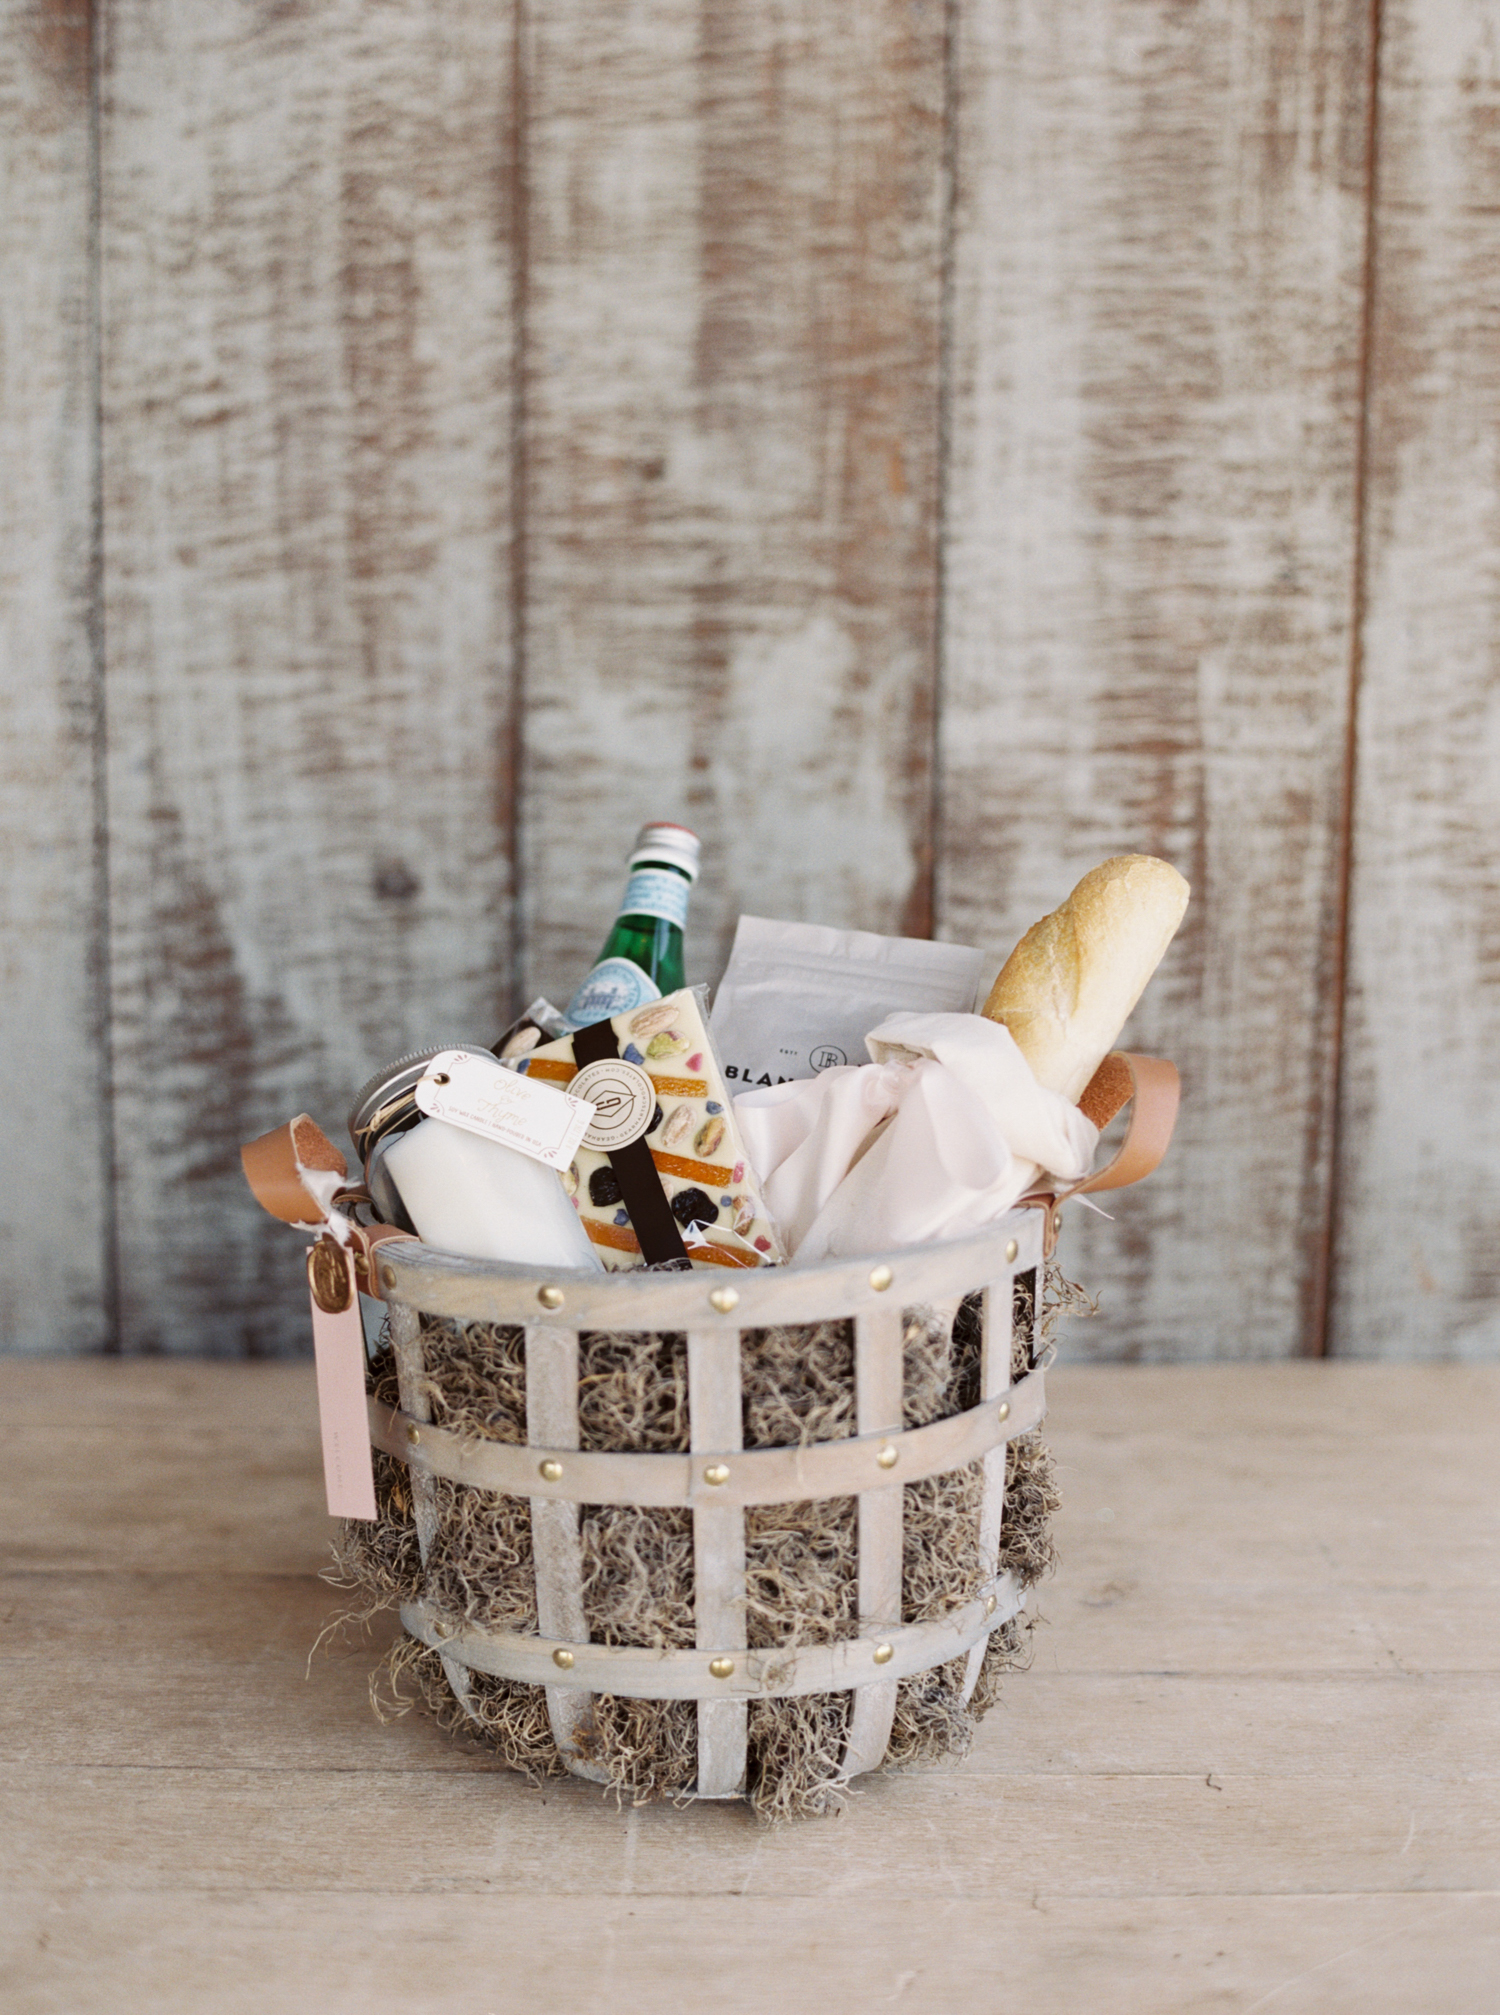 Pippin Hill Wedding Photos | Molly Carr Photography | Lauren Emerson Events | Pippin Hill Farm & Vineyard | Luxury Wedding Gift Basket with Baguette, Candle, Chocolate, and Water